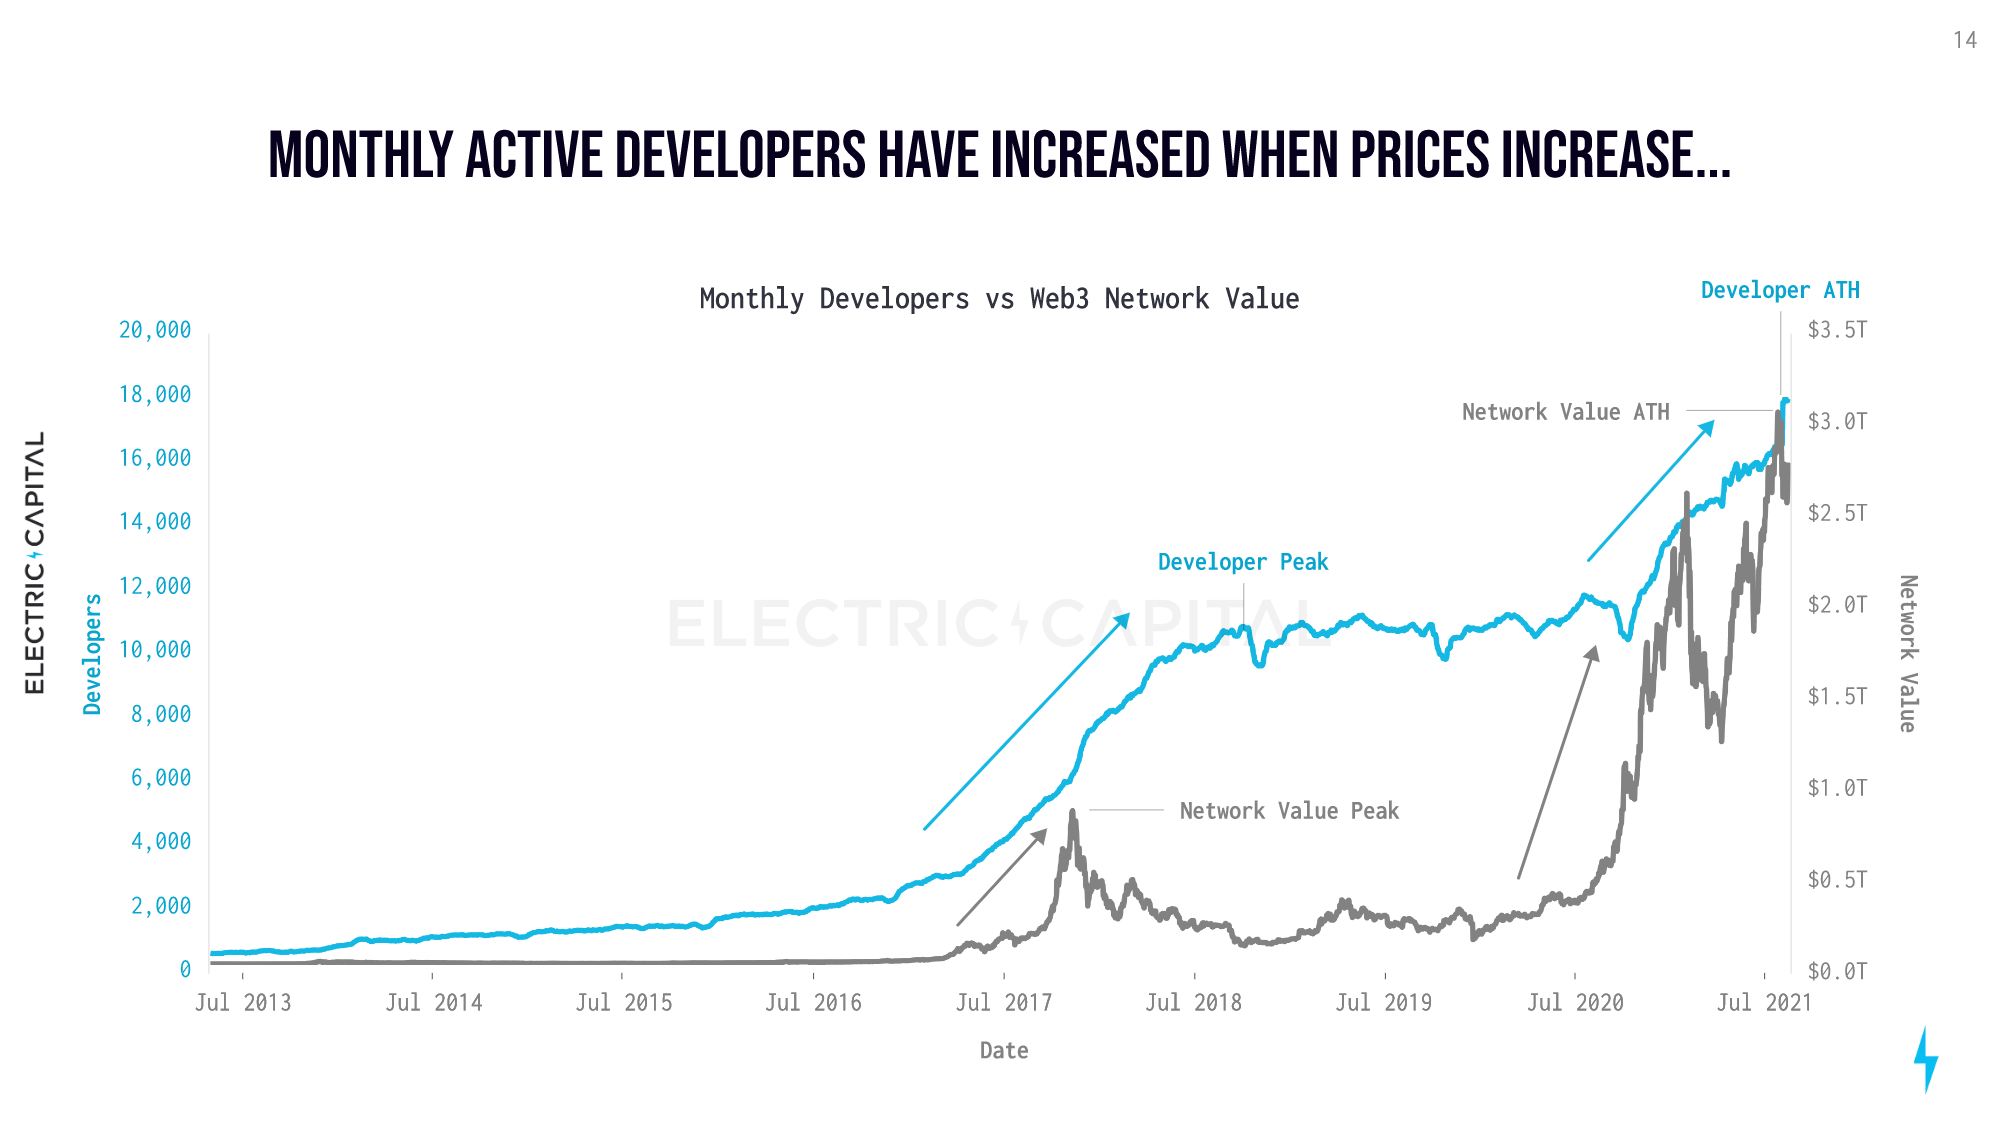 Monthly developers vs Web3 network value (Electric Capital)